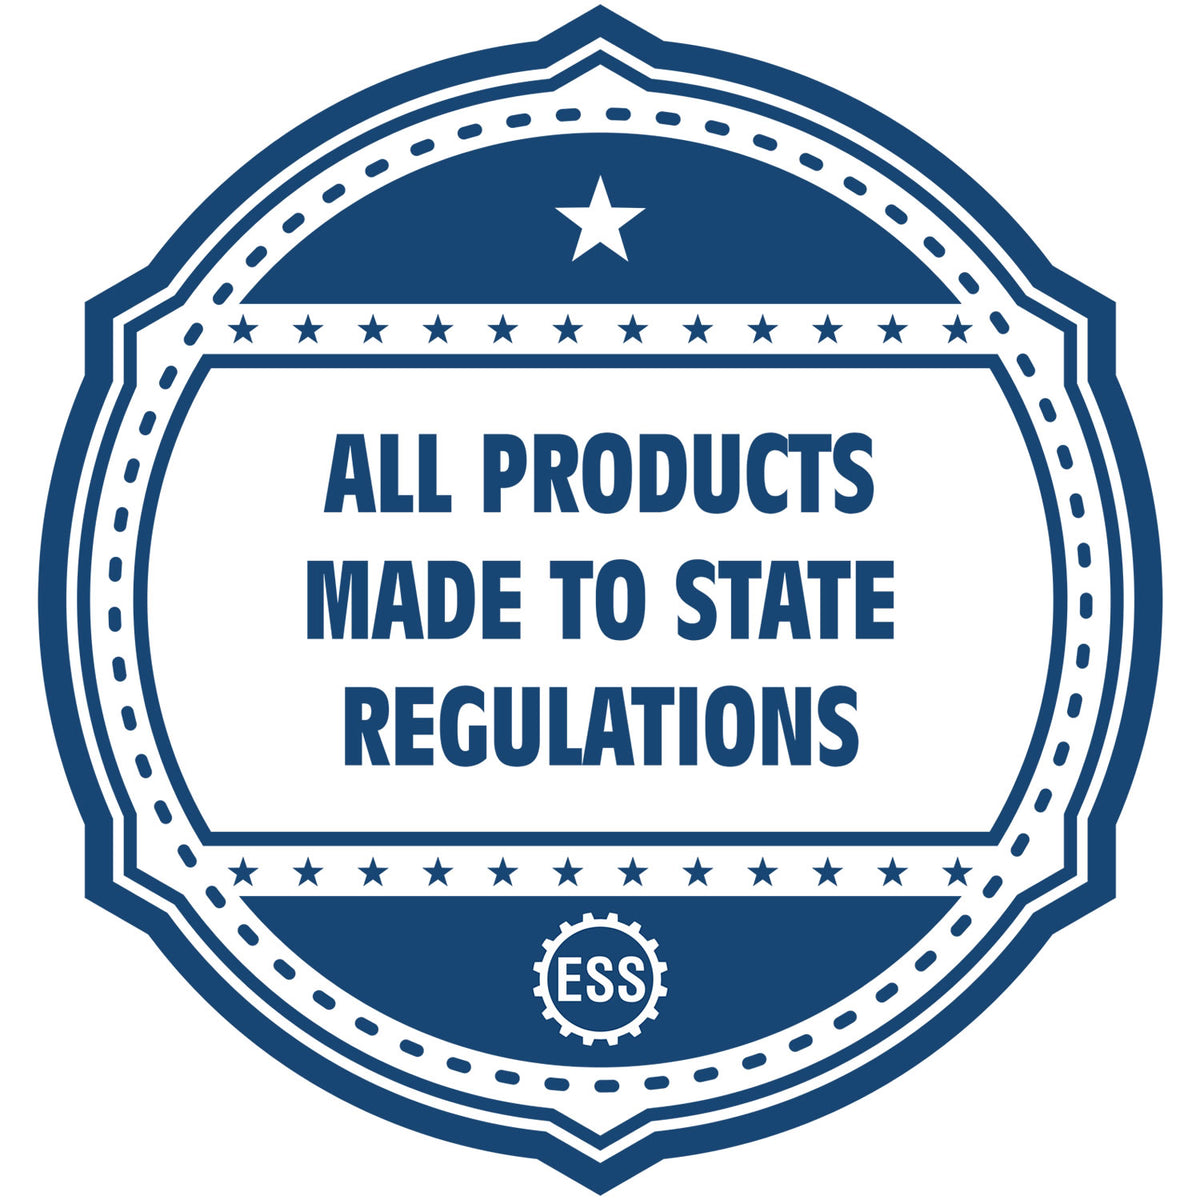 A blue icon or badge for the New York Professional Geologist Seal Stamp showing that this product is made in compliance with state regulations.